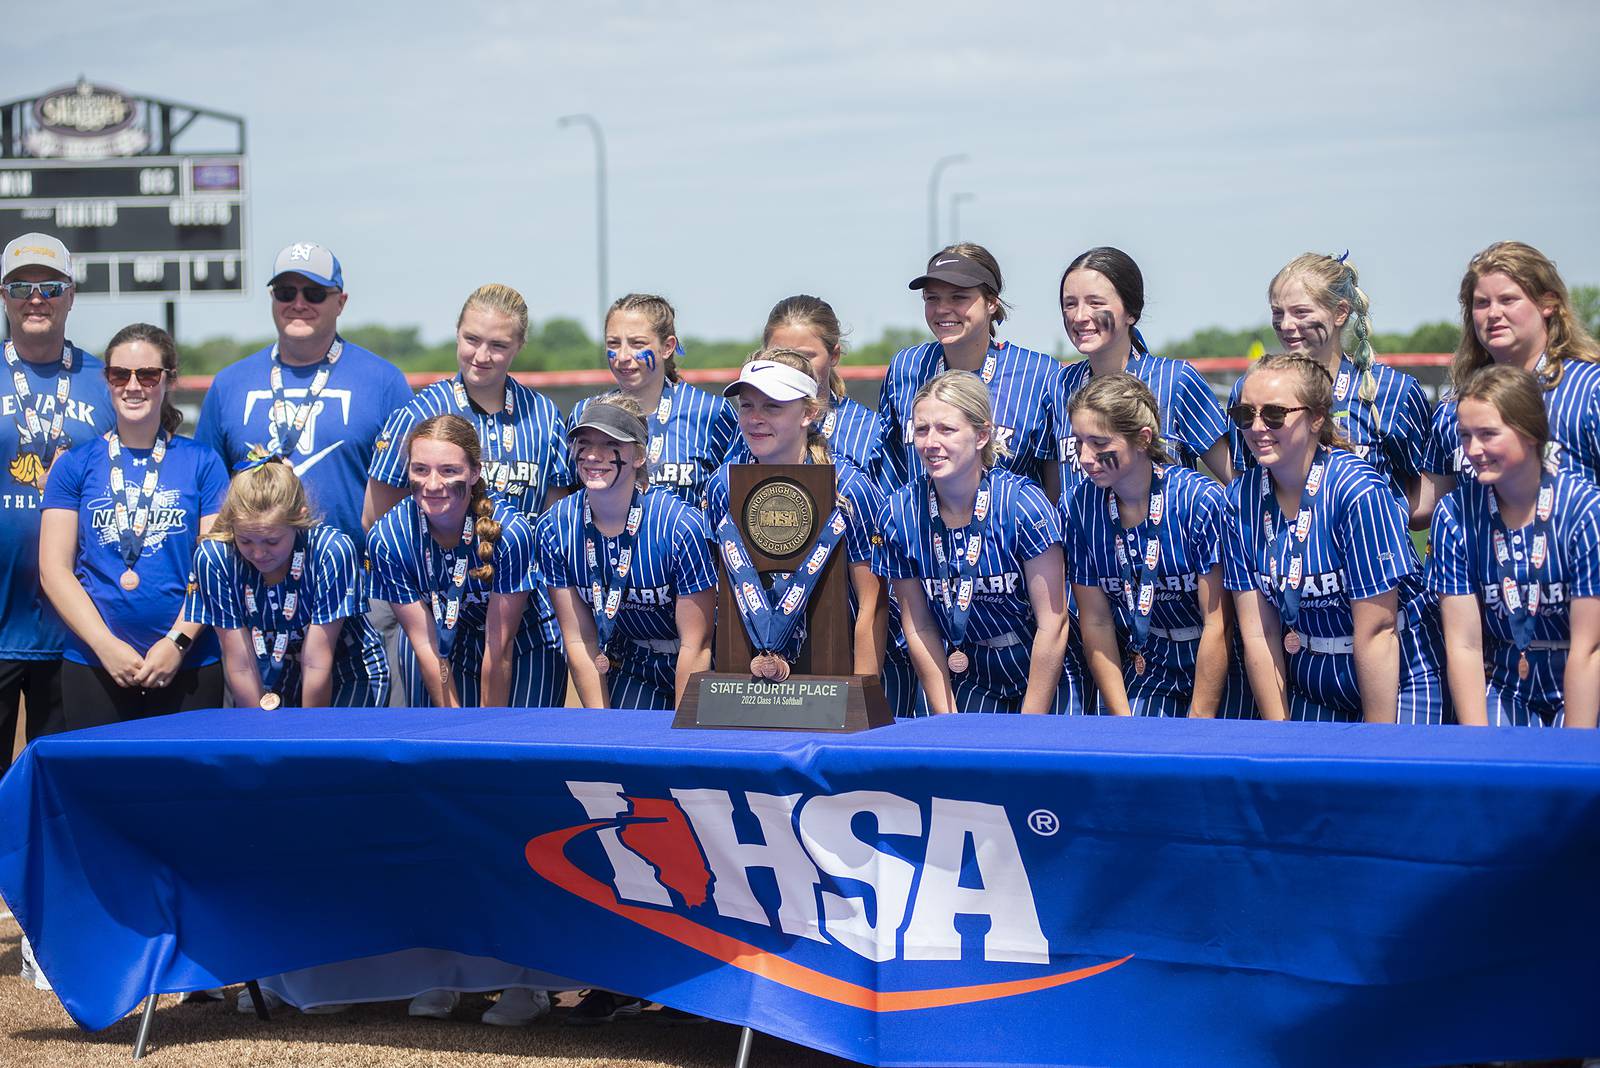 Class 1A State Softball Newark falls to Forreston in 3rdplace game in